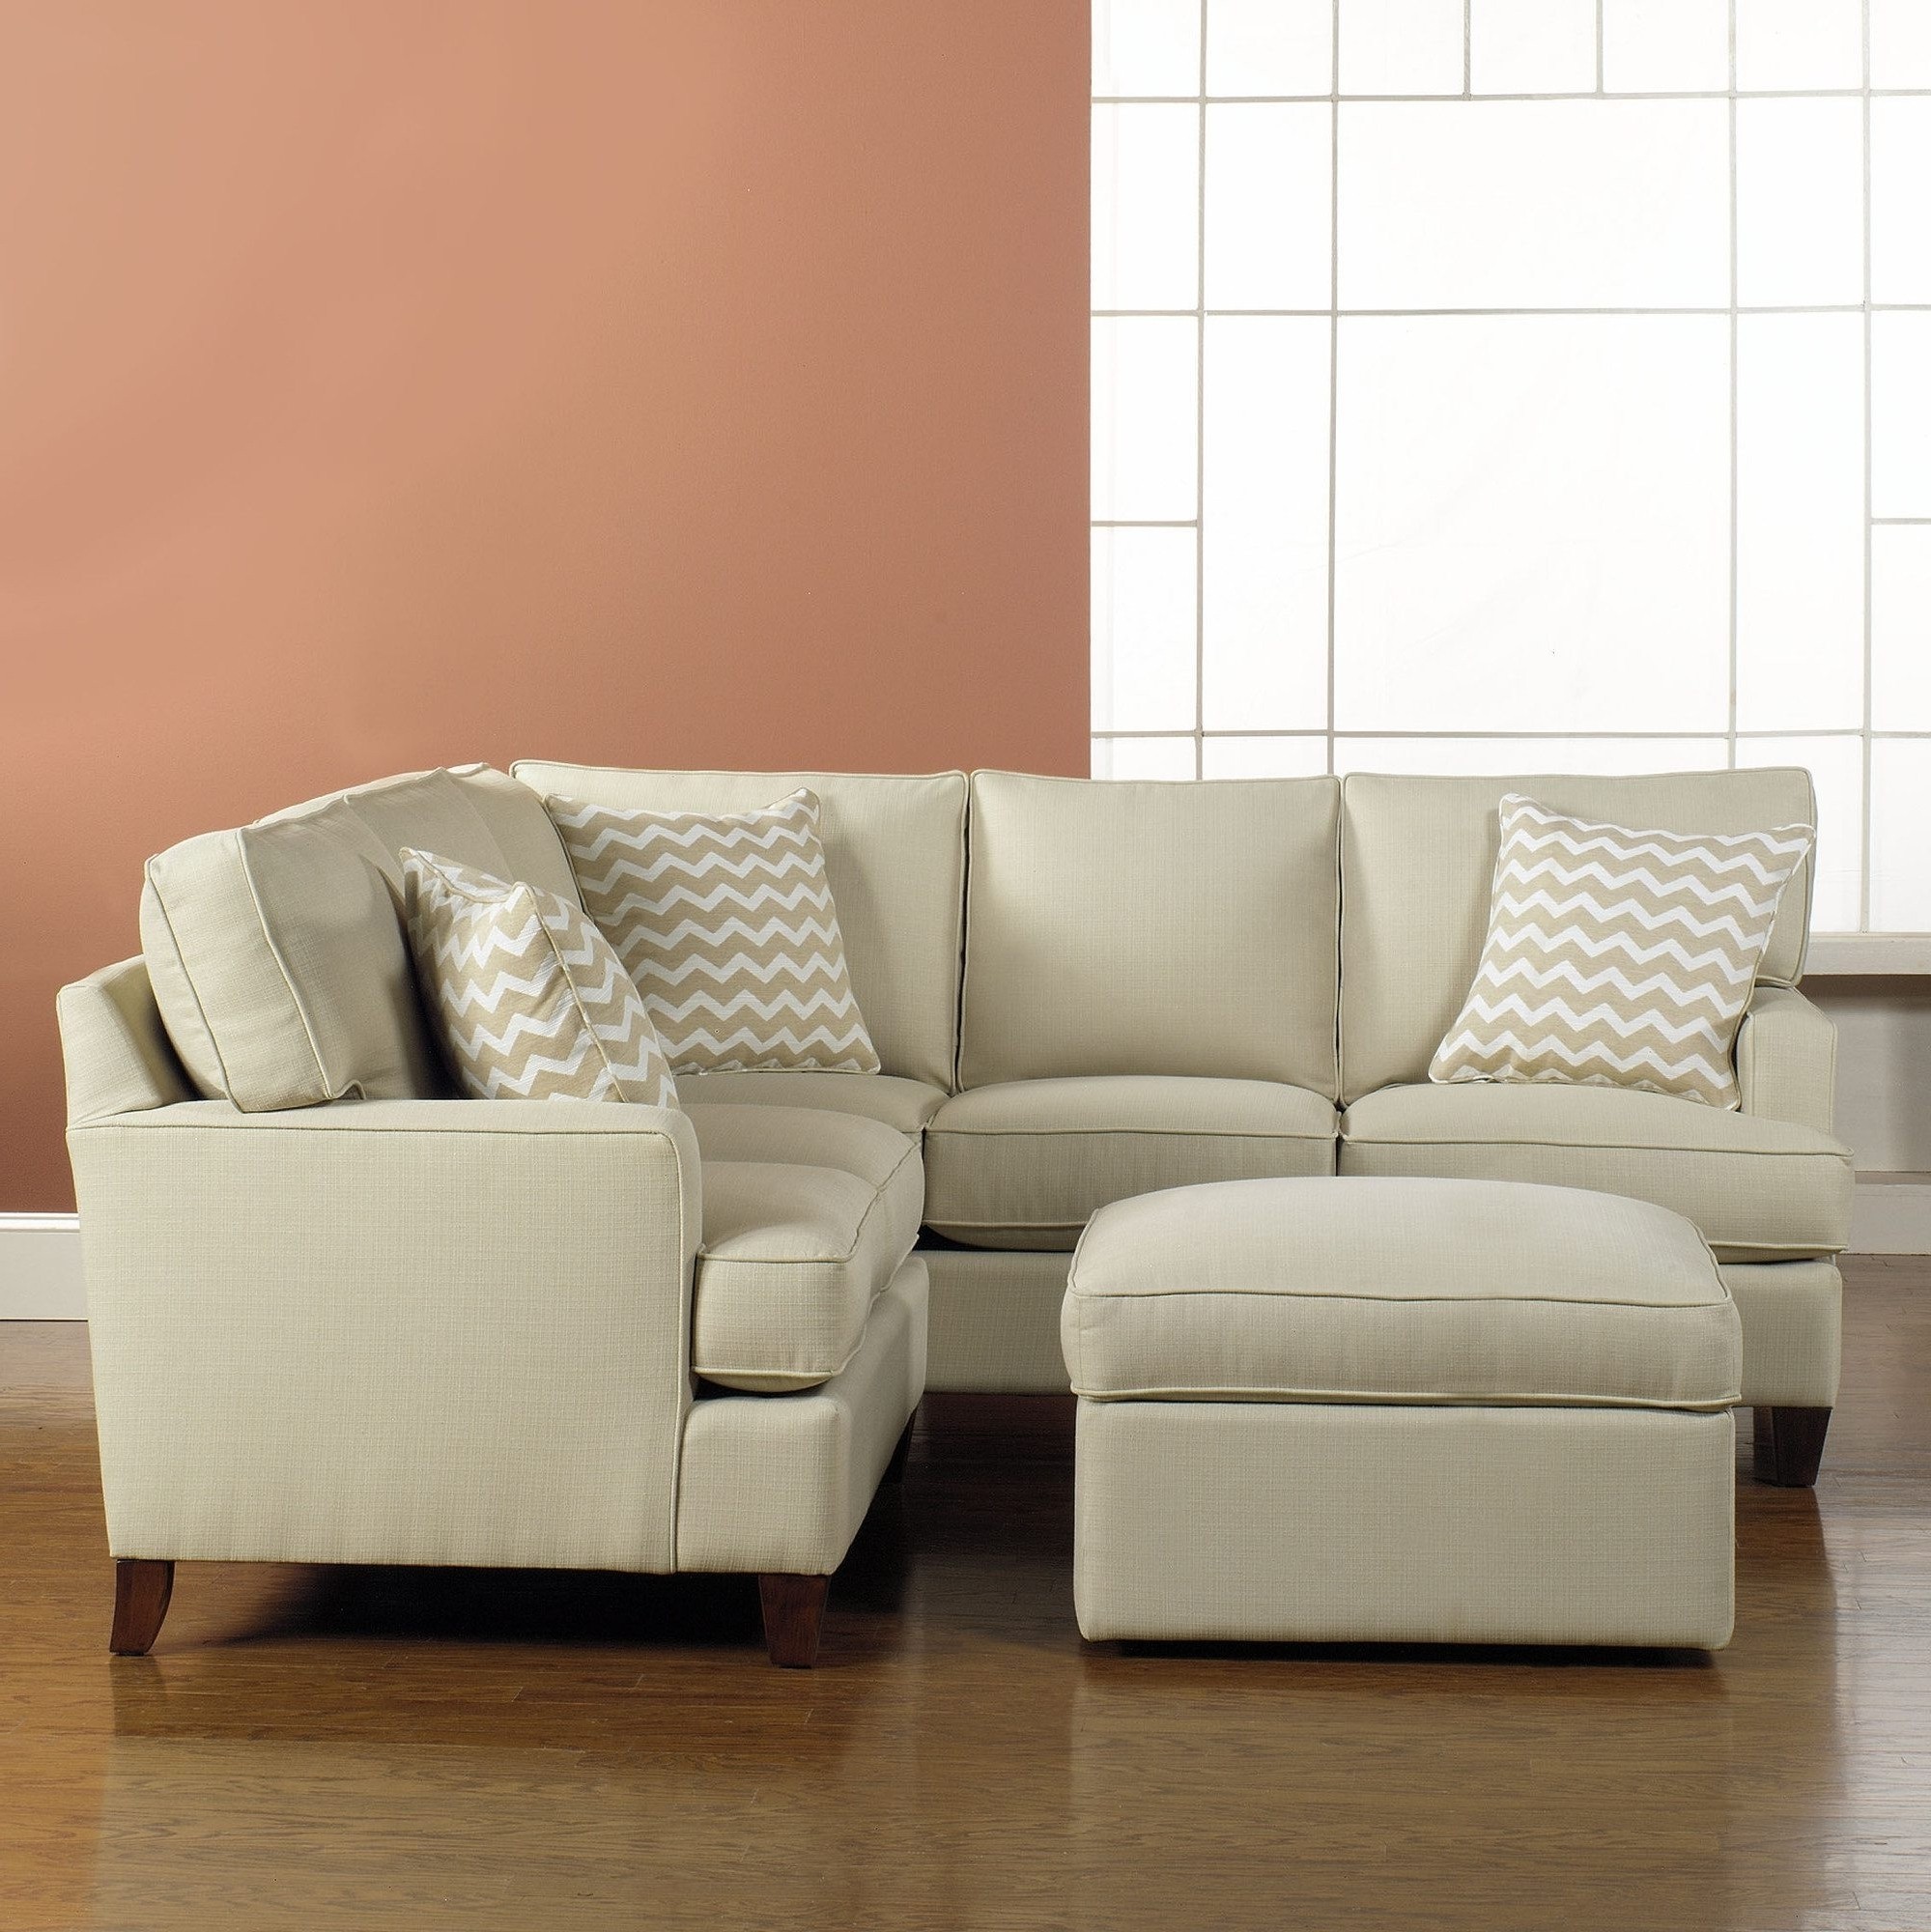 2020 latest small sofas with chaise